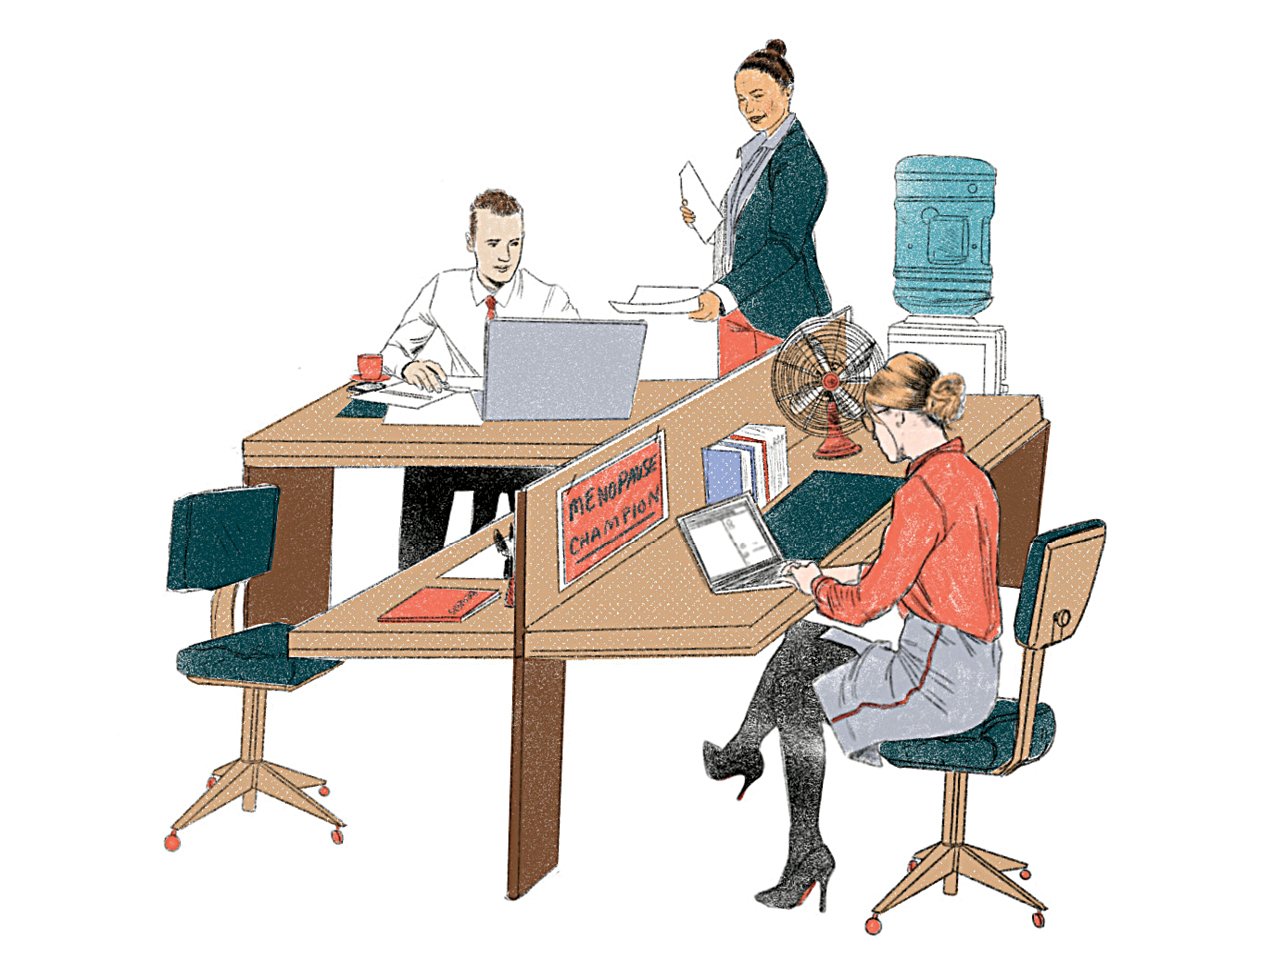 An illustration of people in an office at desks, representing different ways workplaces can be menopause-inclusive.